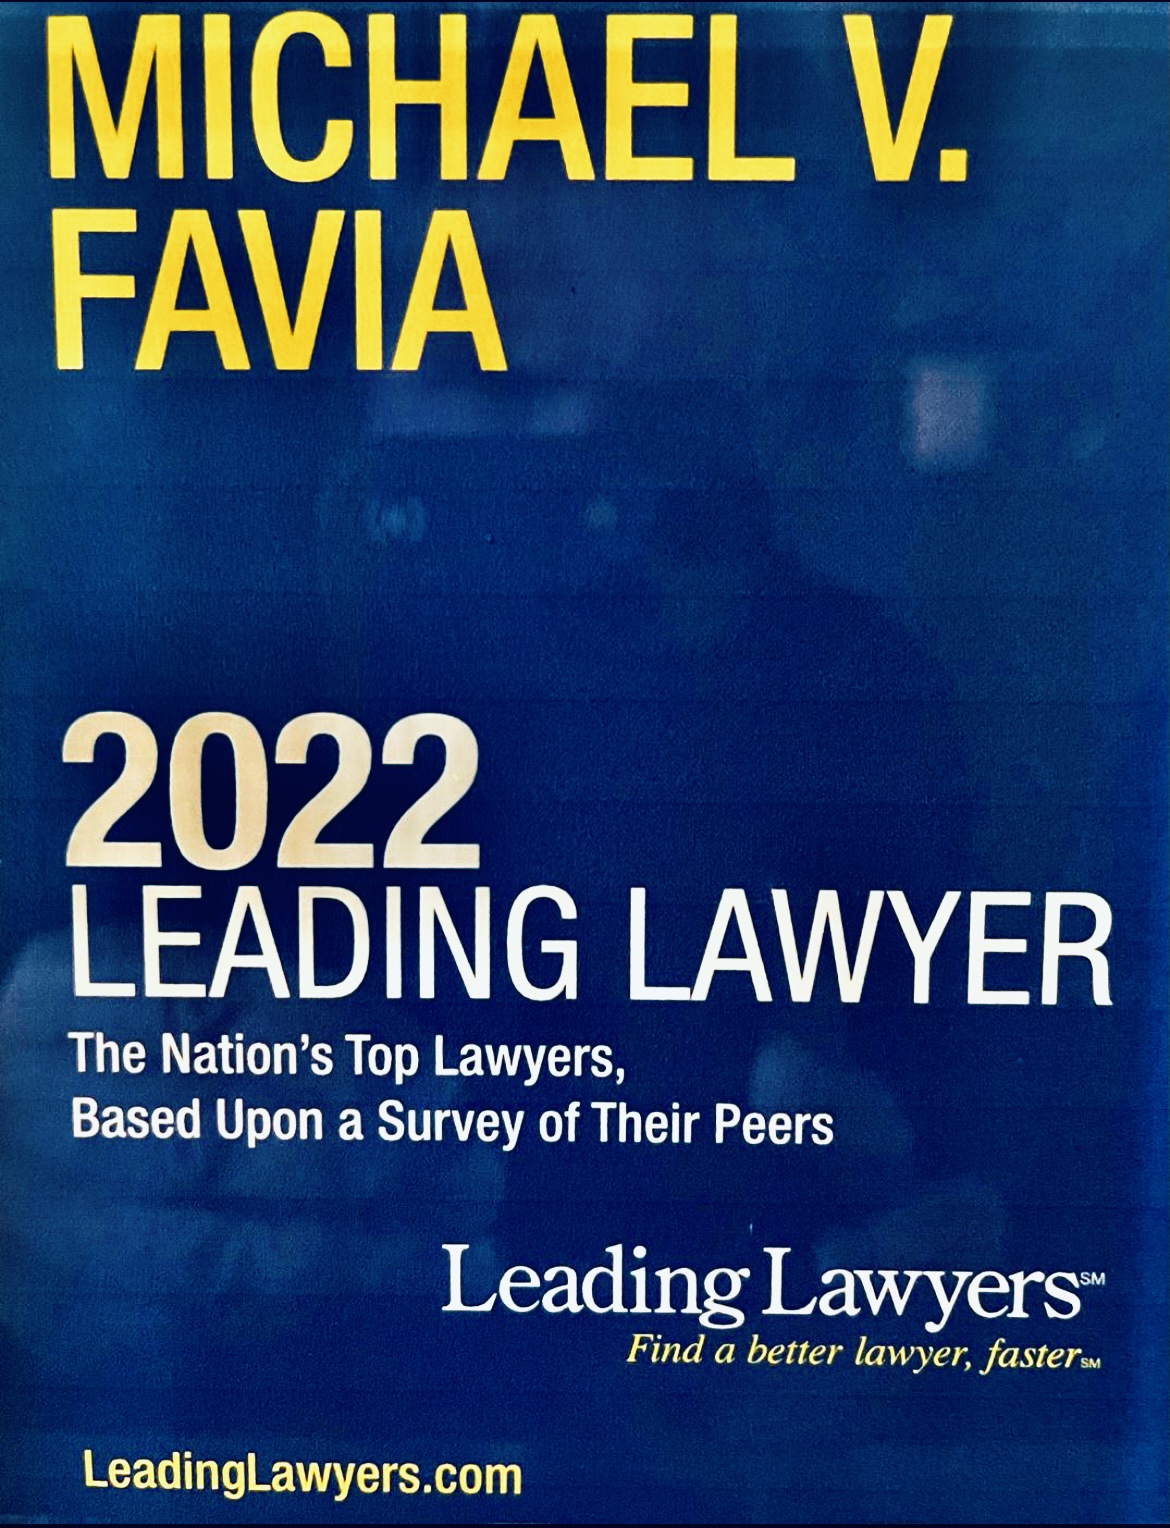 Michael V. Favia is Listed Among Peer Selected Leading Lawyers for 2022